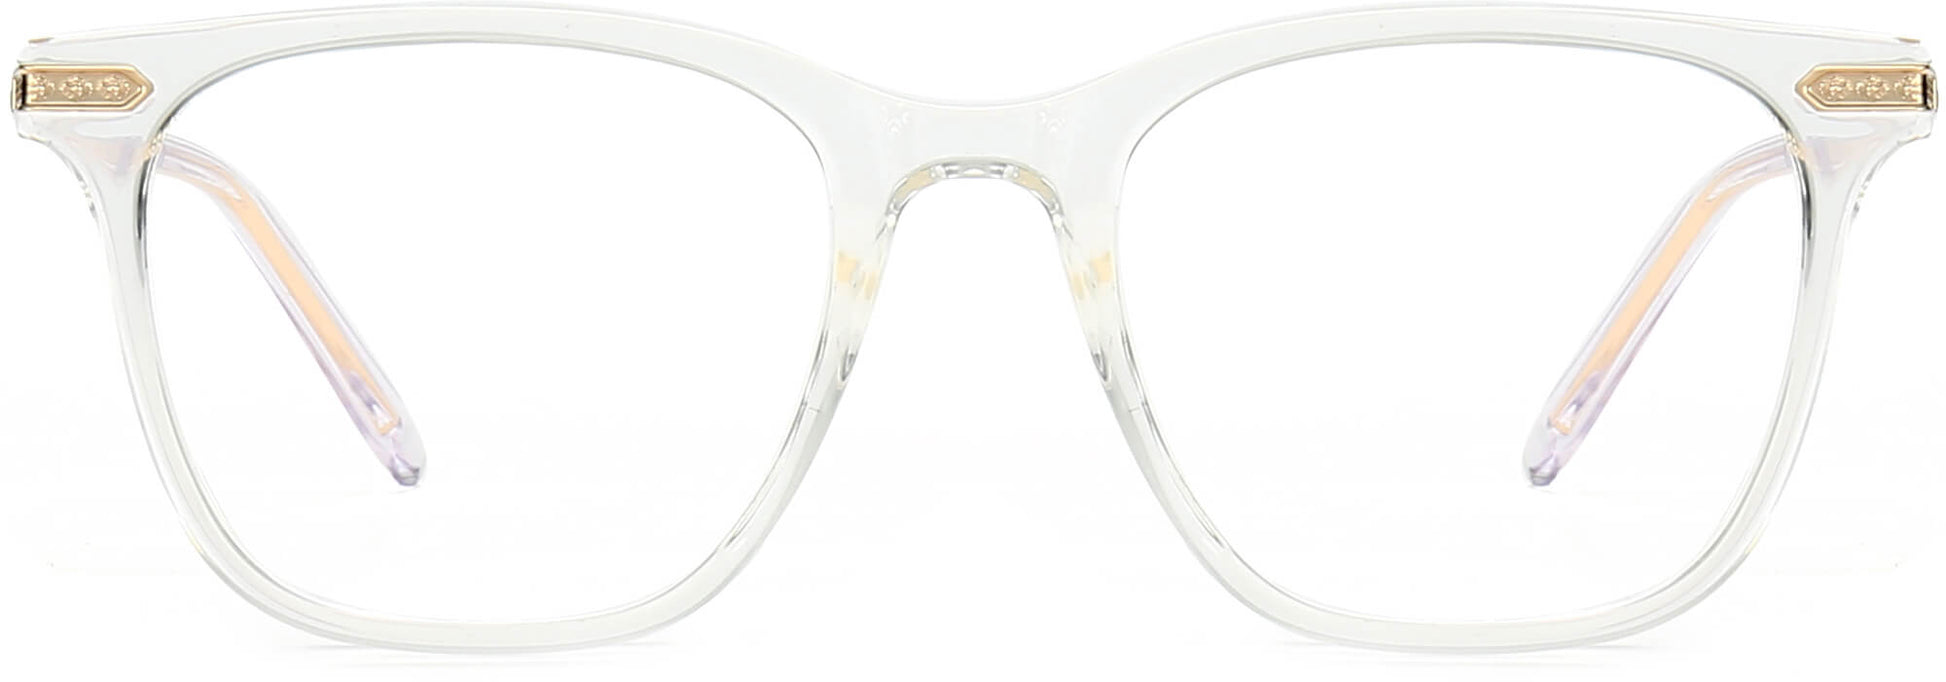 Leonard Square Clear Eyeglasses from ANRRI, front view